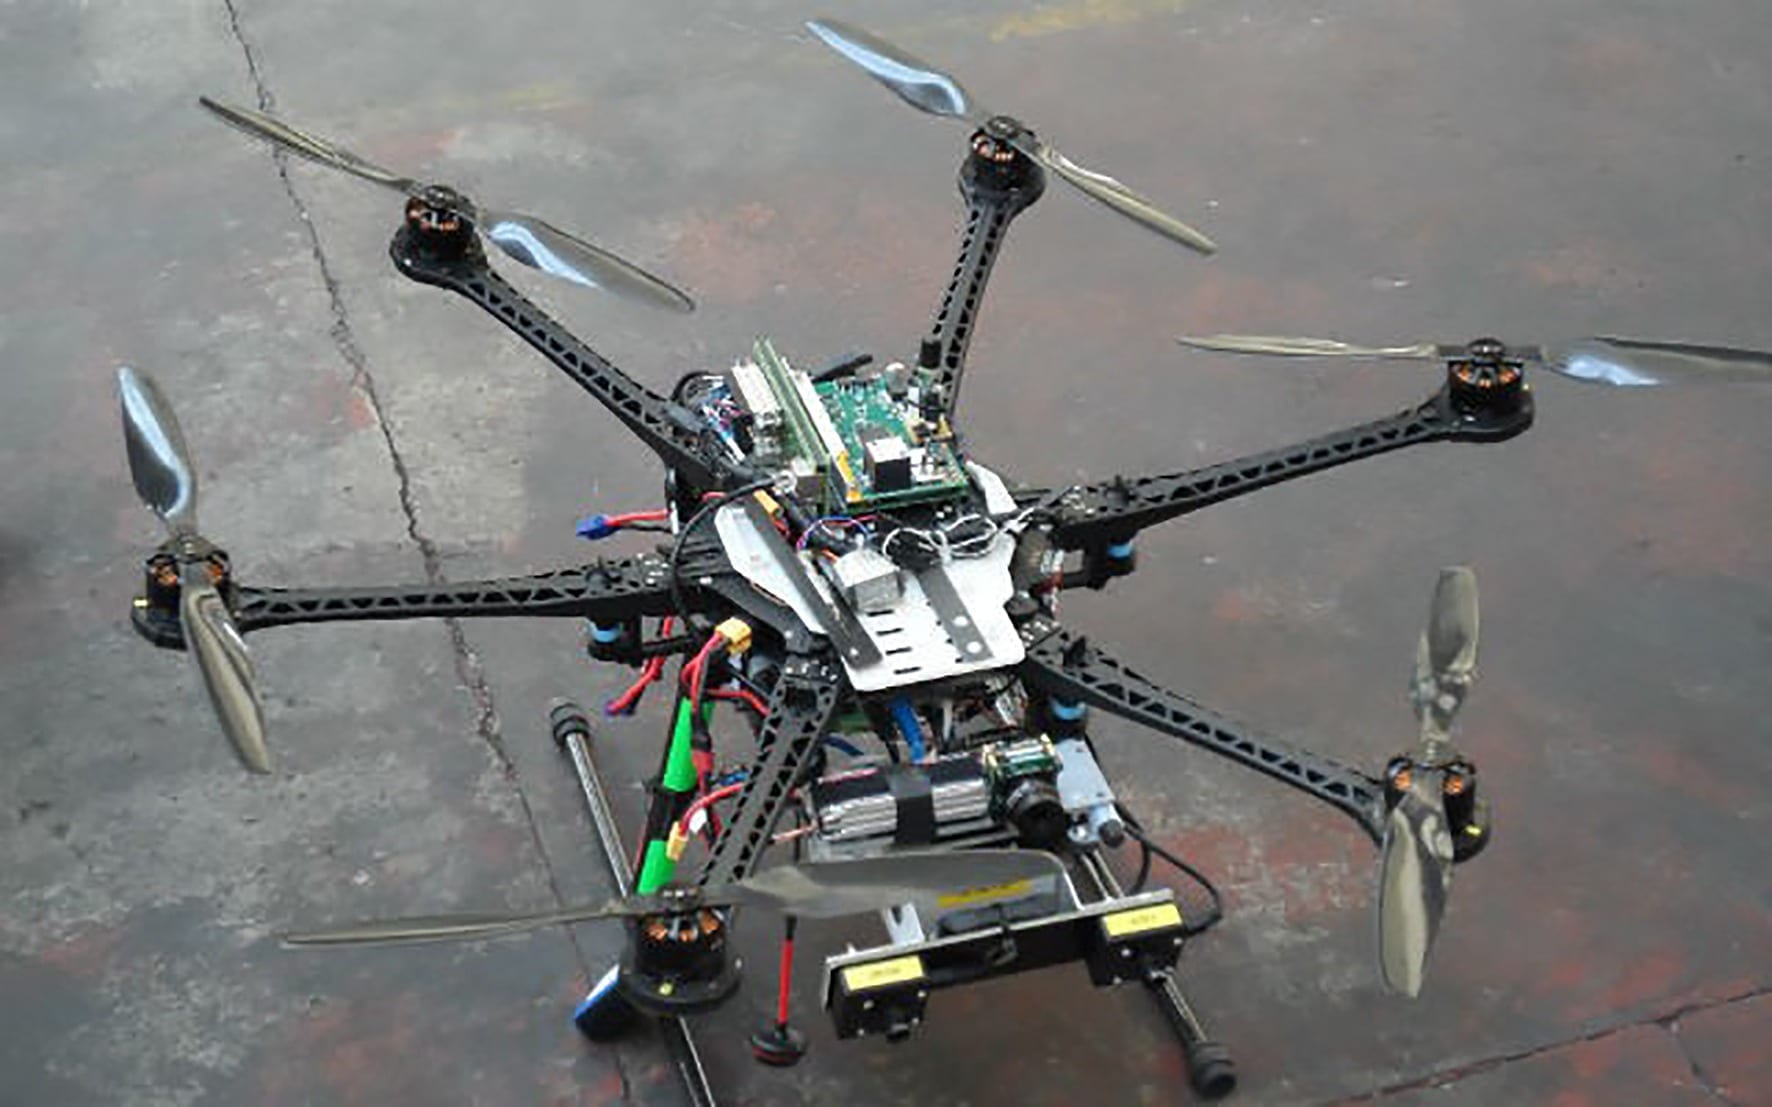 Scientist created drones that fly autonomously and learn new routes